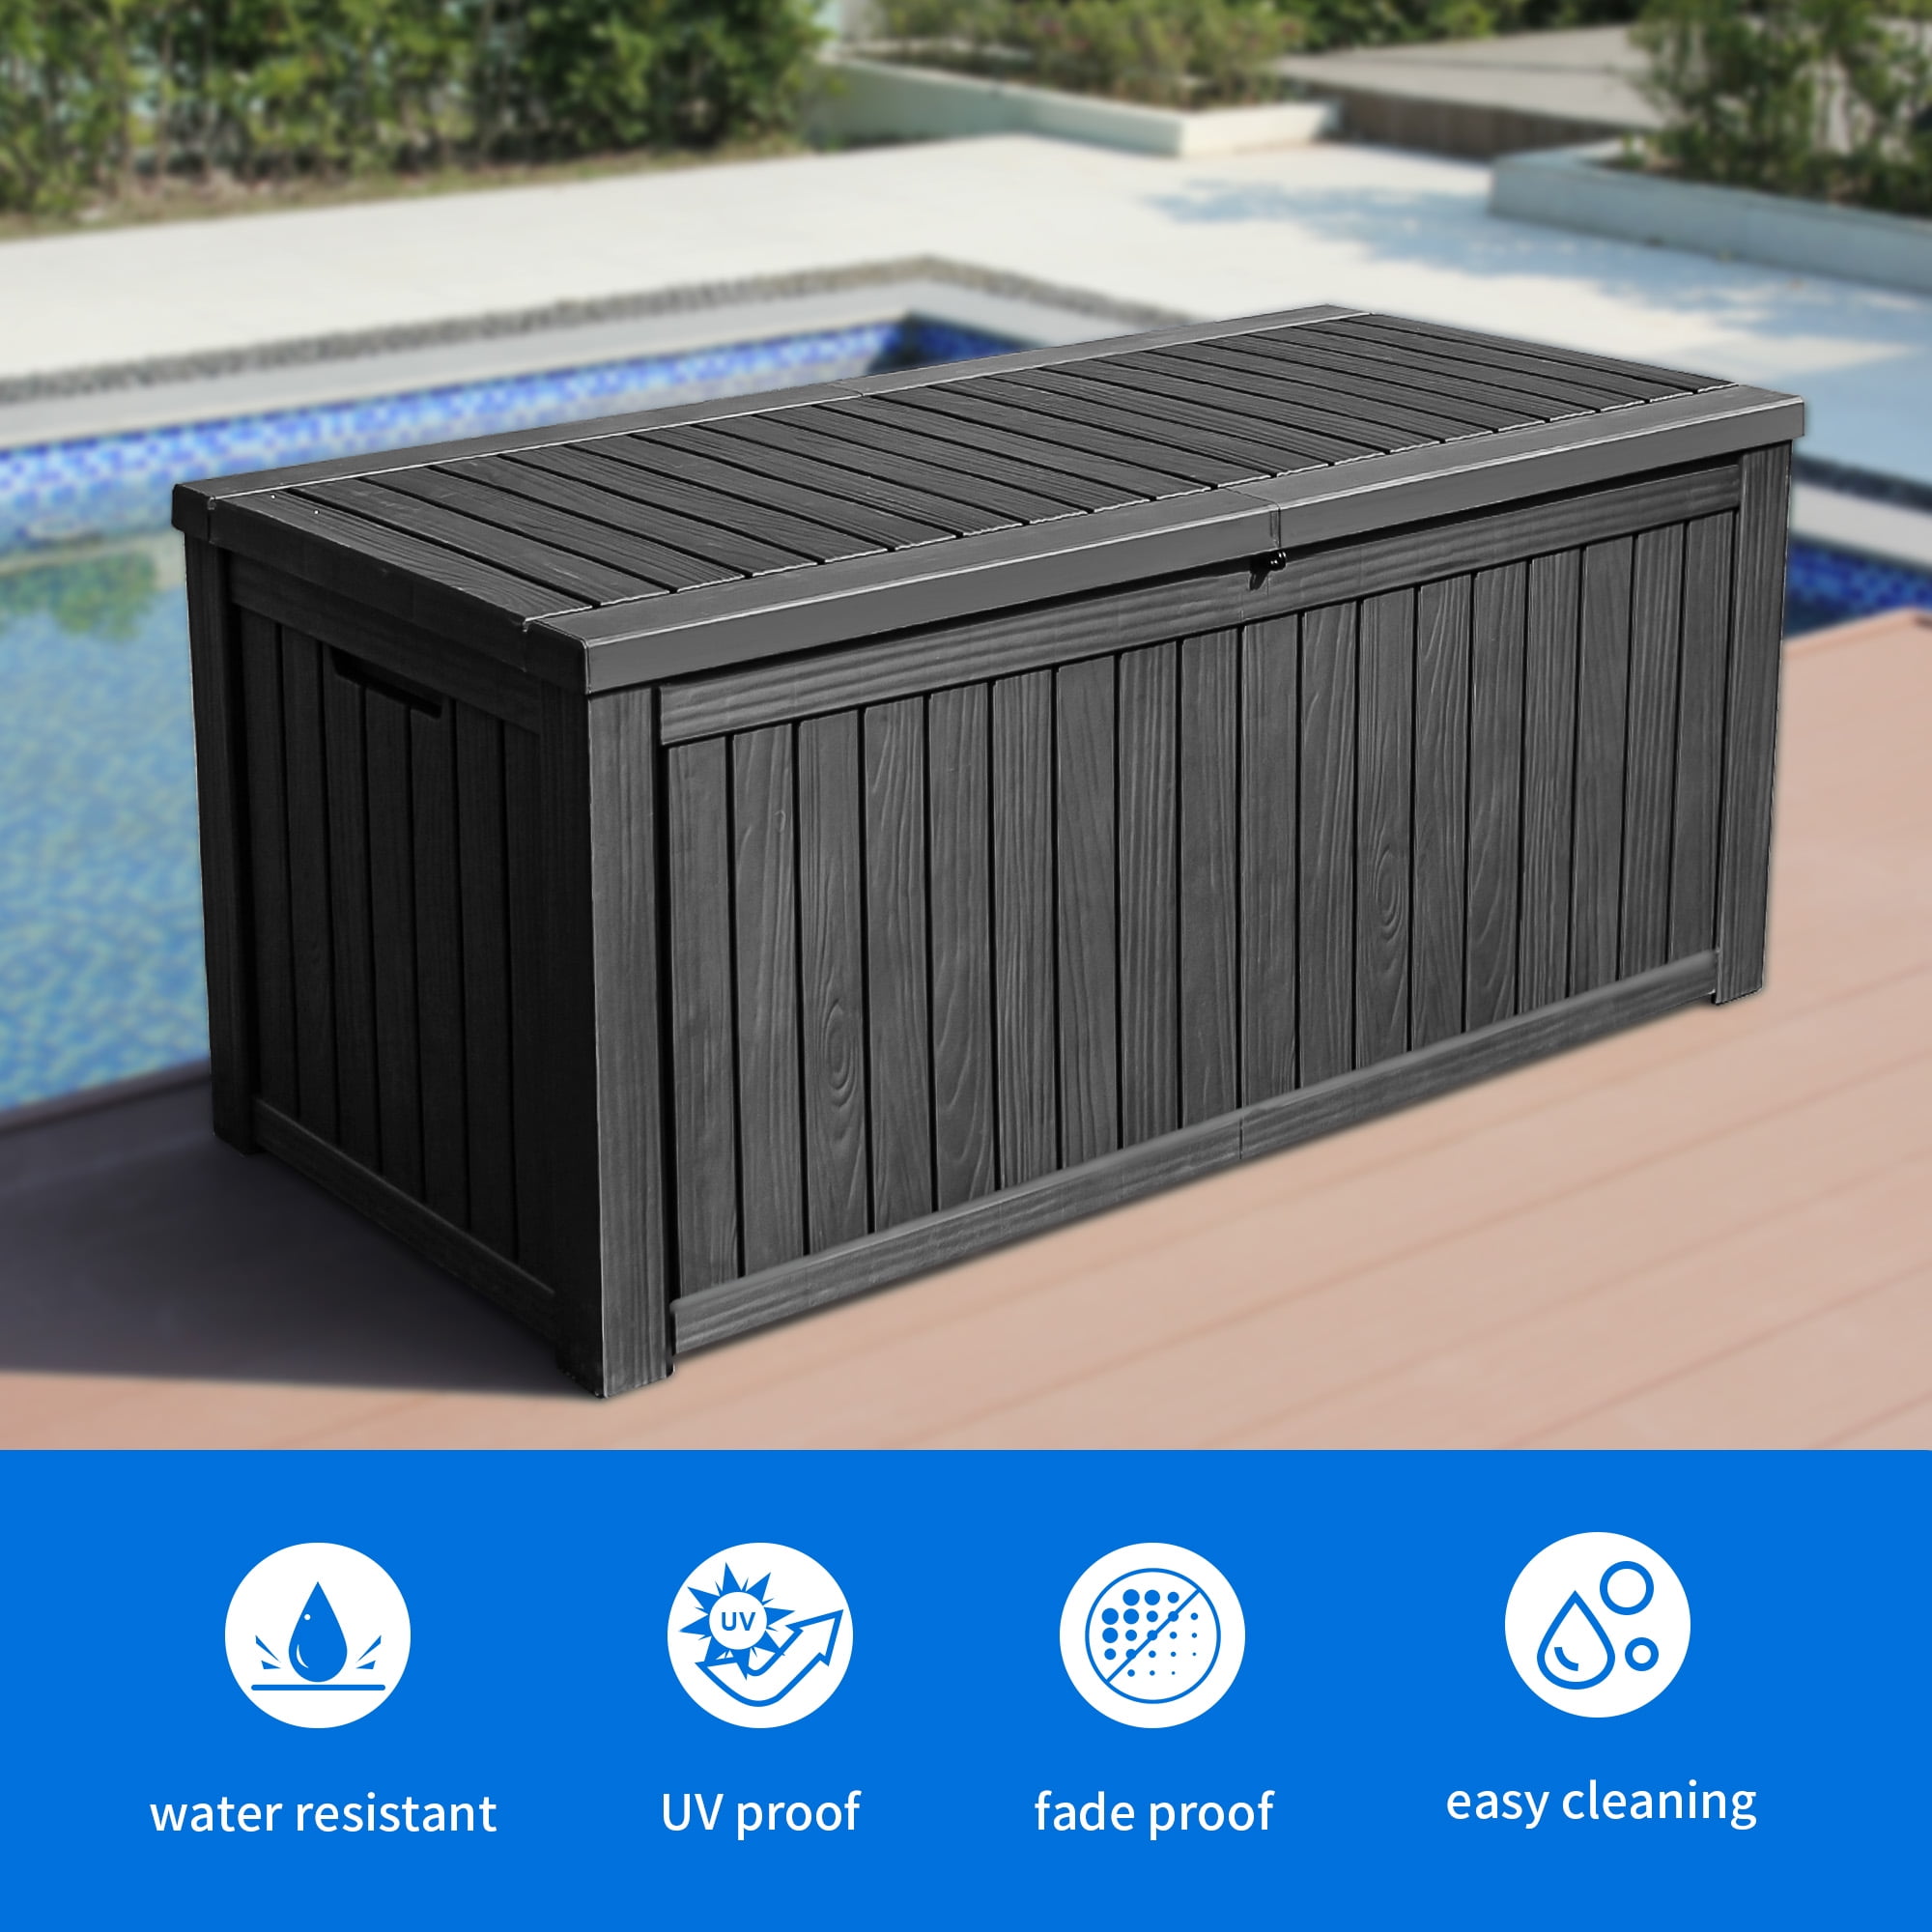 BTExpert 150 Gallon Large Resin Deck Box, Outdoor Storage Container for Patio Furniture Cushions Garden Tools Pool Toys Sports Equipment Waterproof